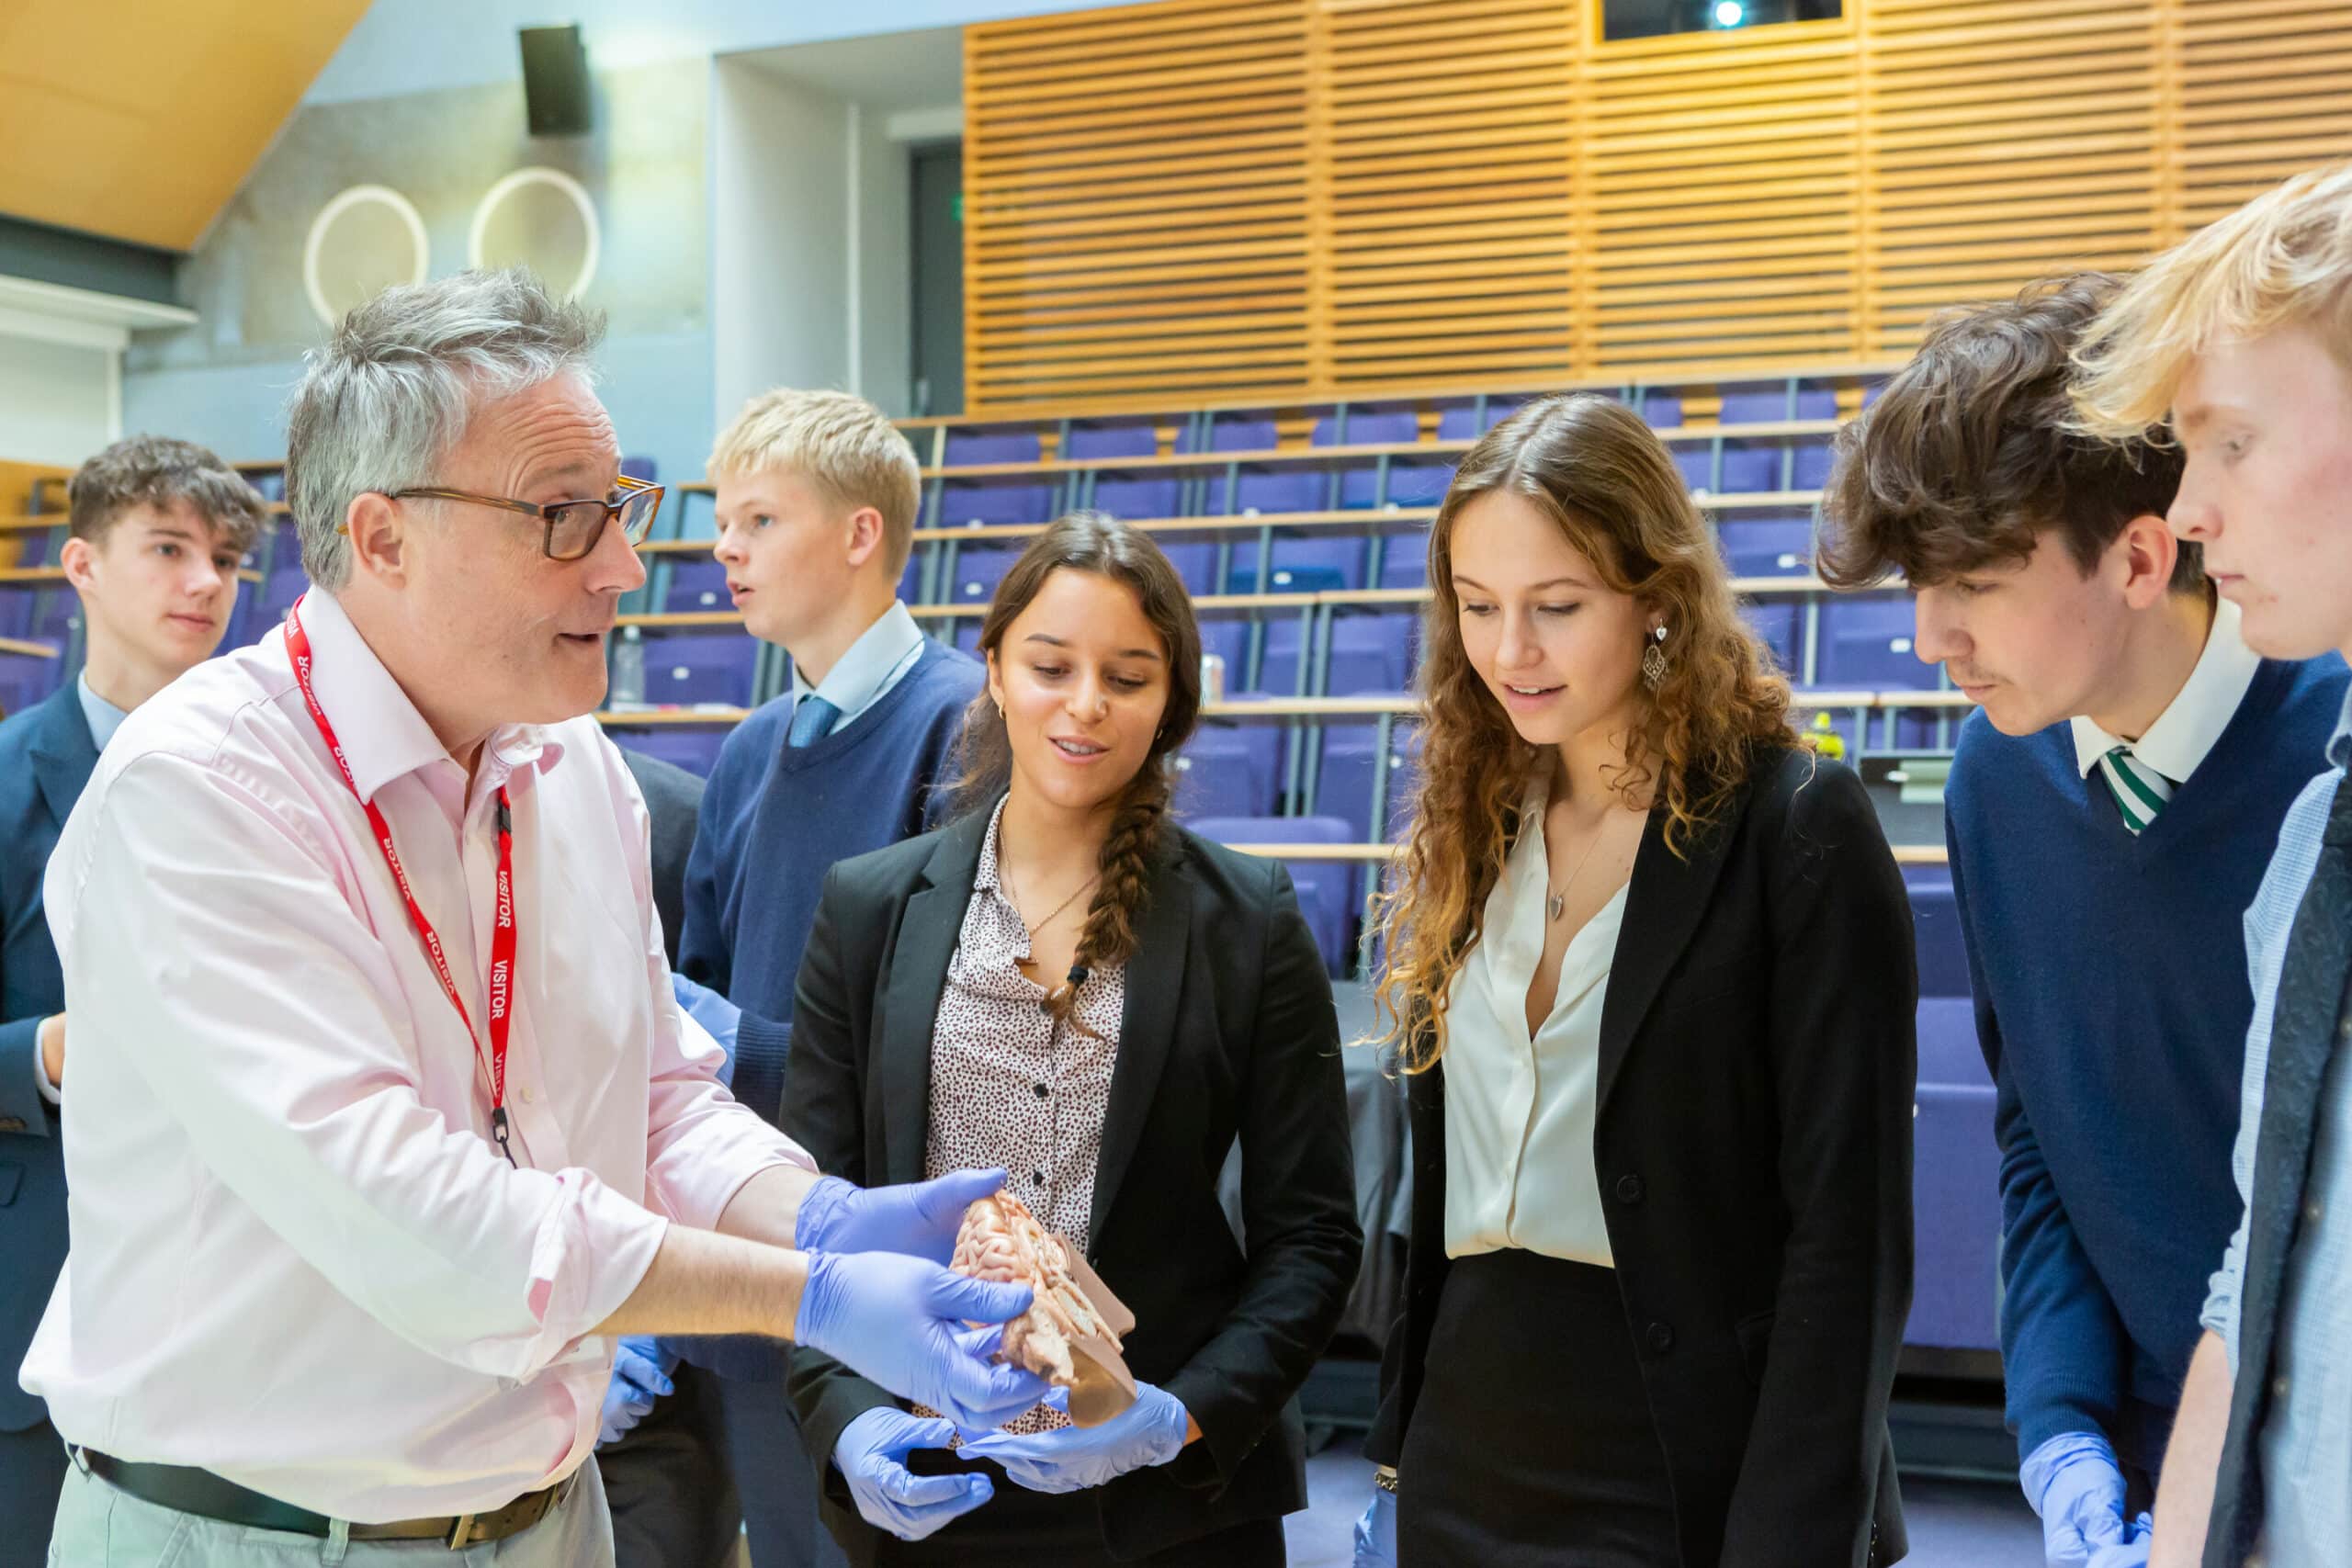 A Level Neuroscience Workshops with Dr Sutton